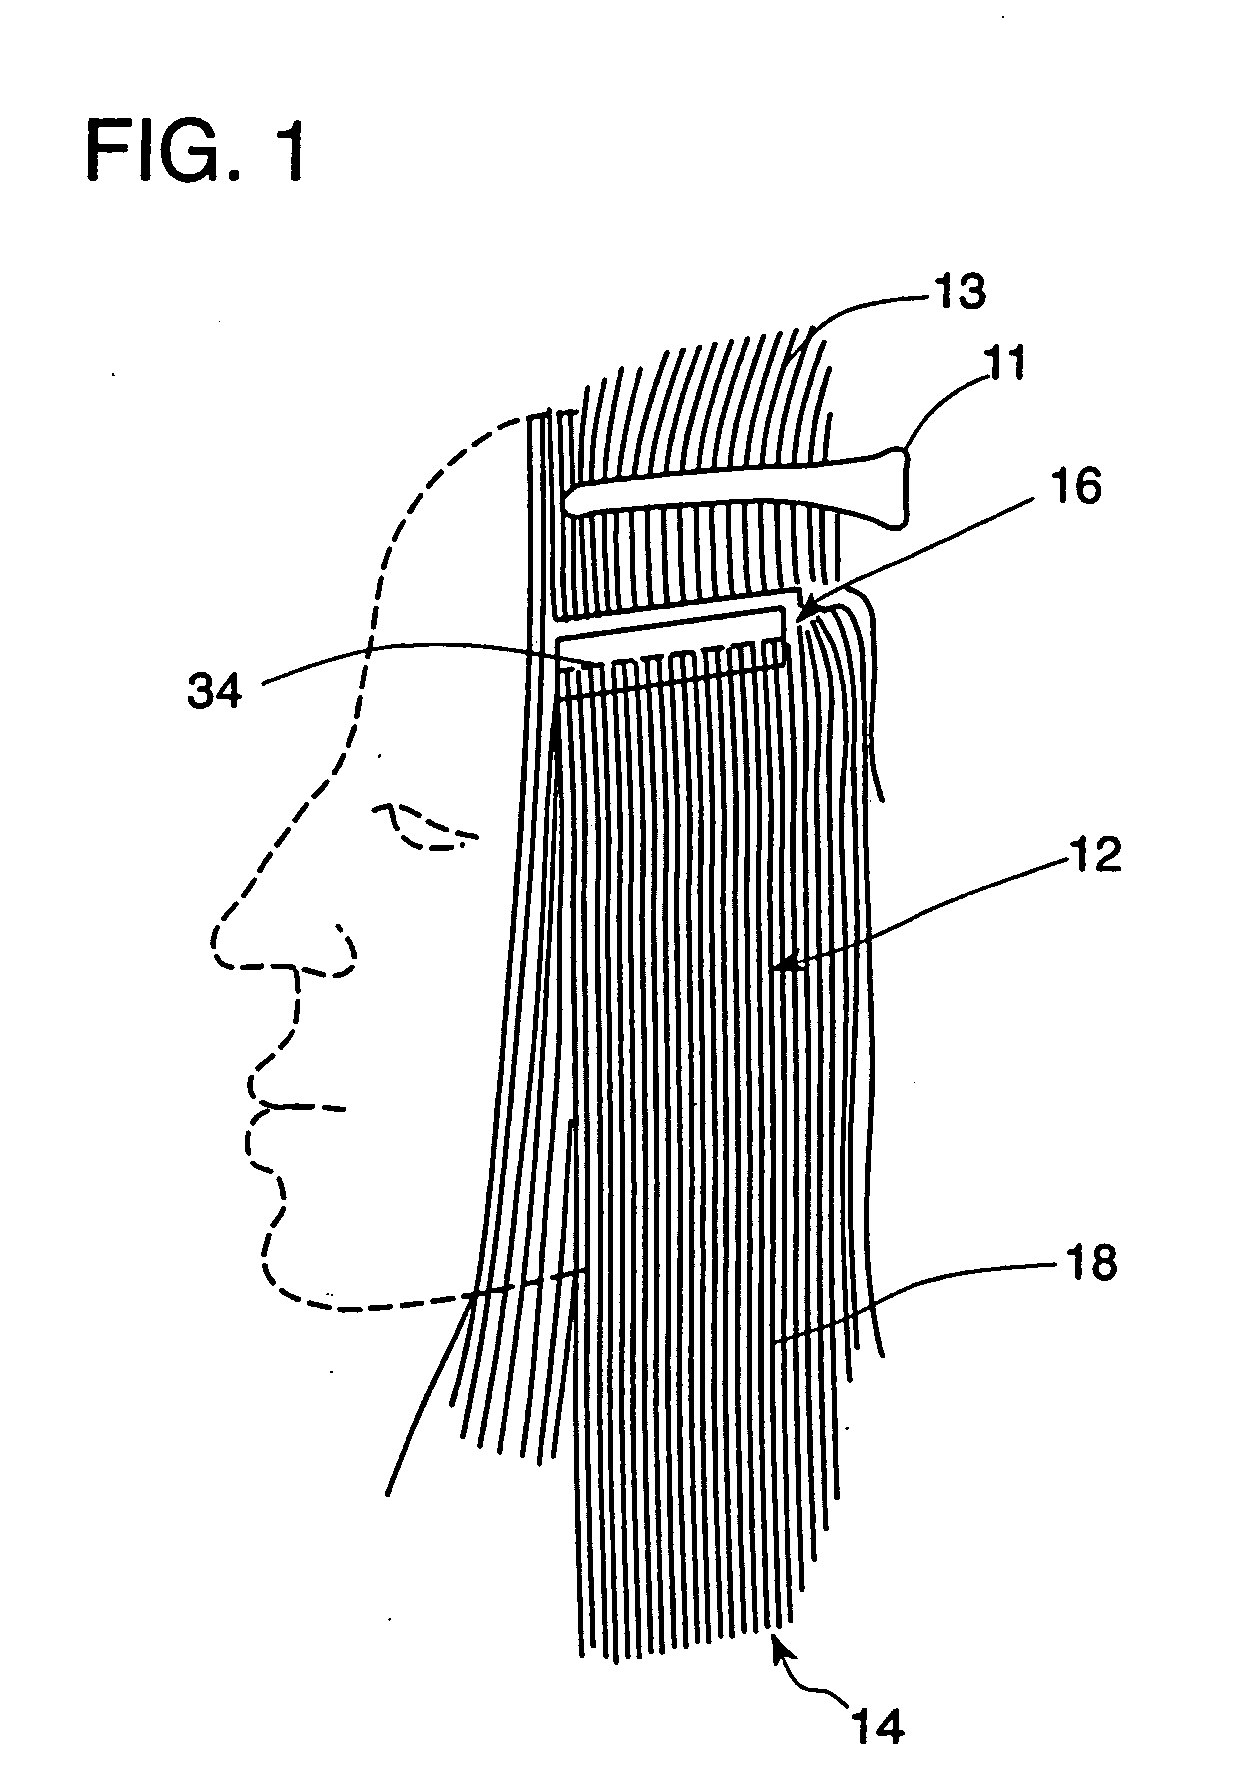 Hair extensions and method of attachment